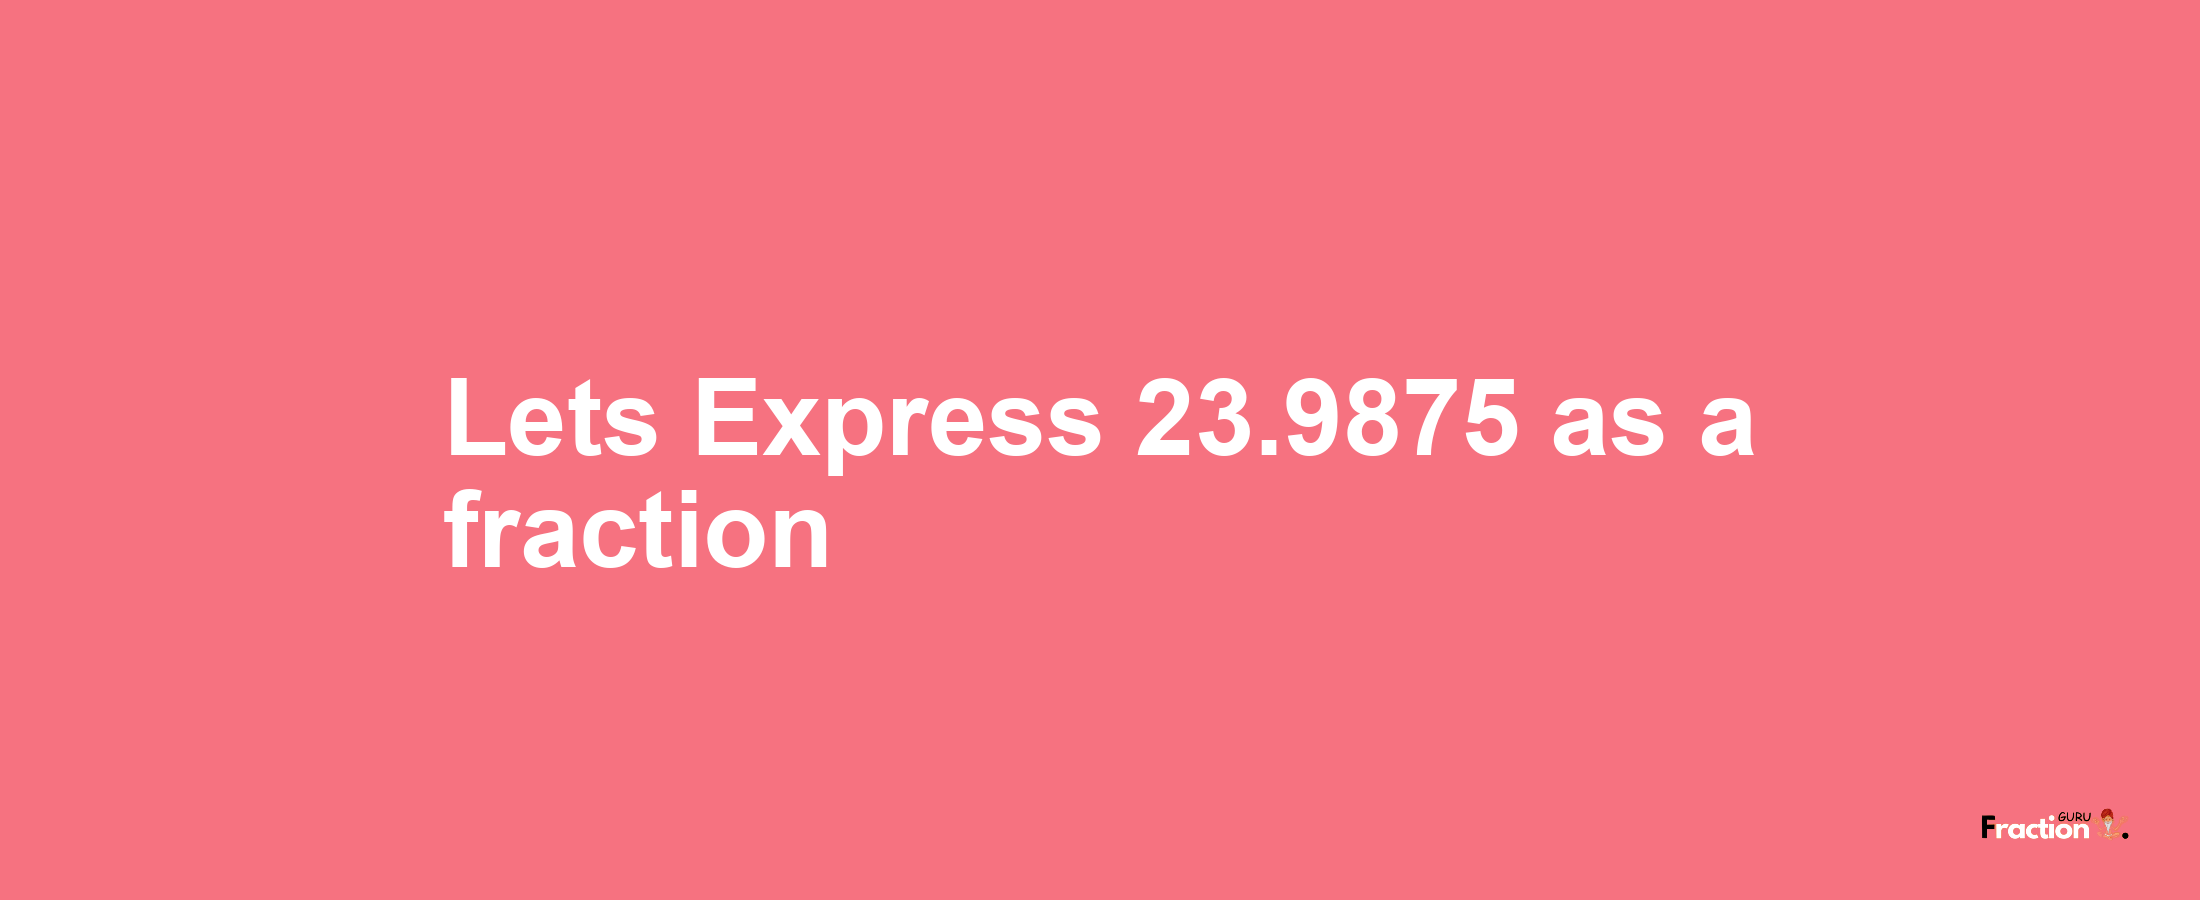 Lets Express 23.9875 as afraction